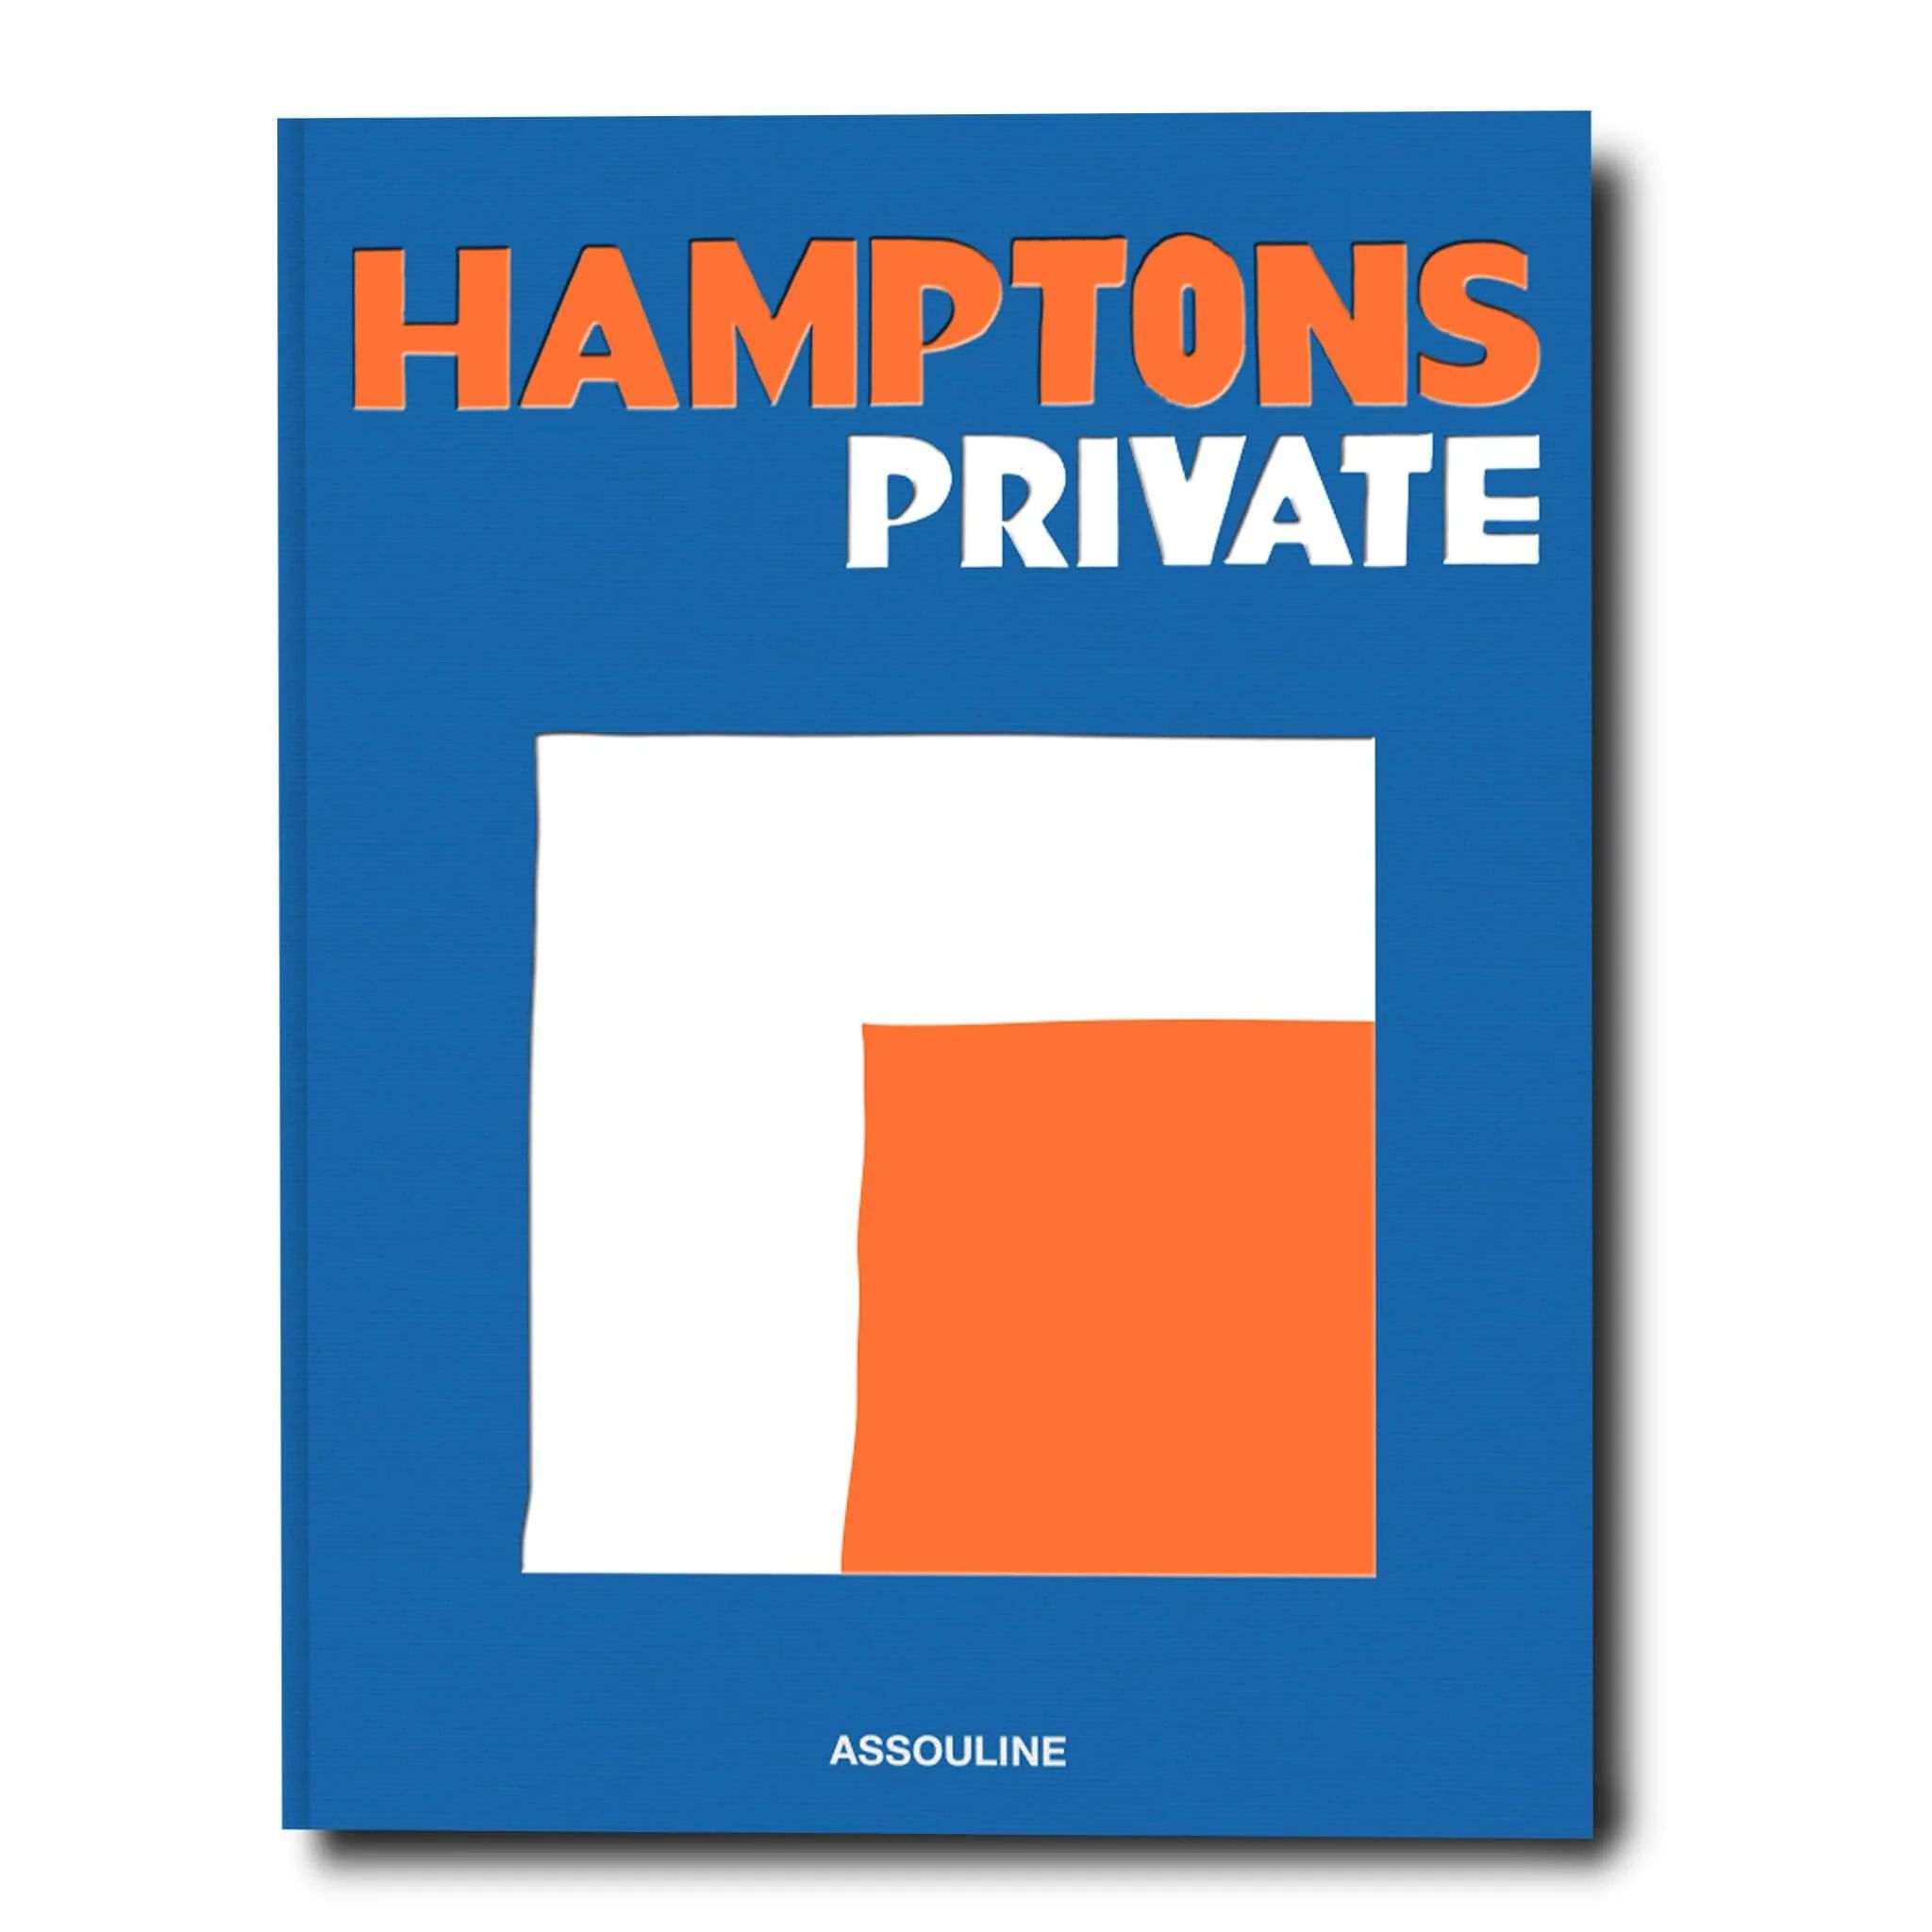 Hamptons Private by Dan Rattiner - Coffee Table Book | ASSOULINE | Assouline